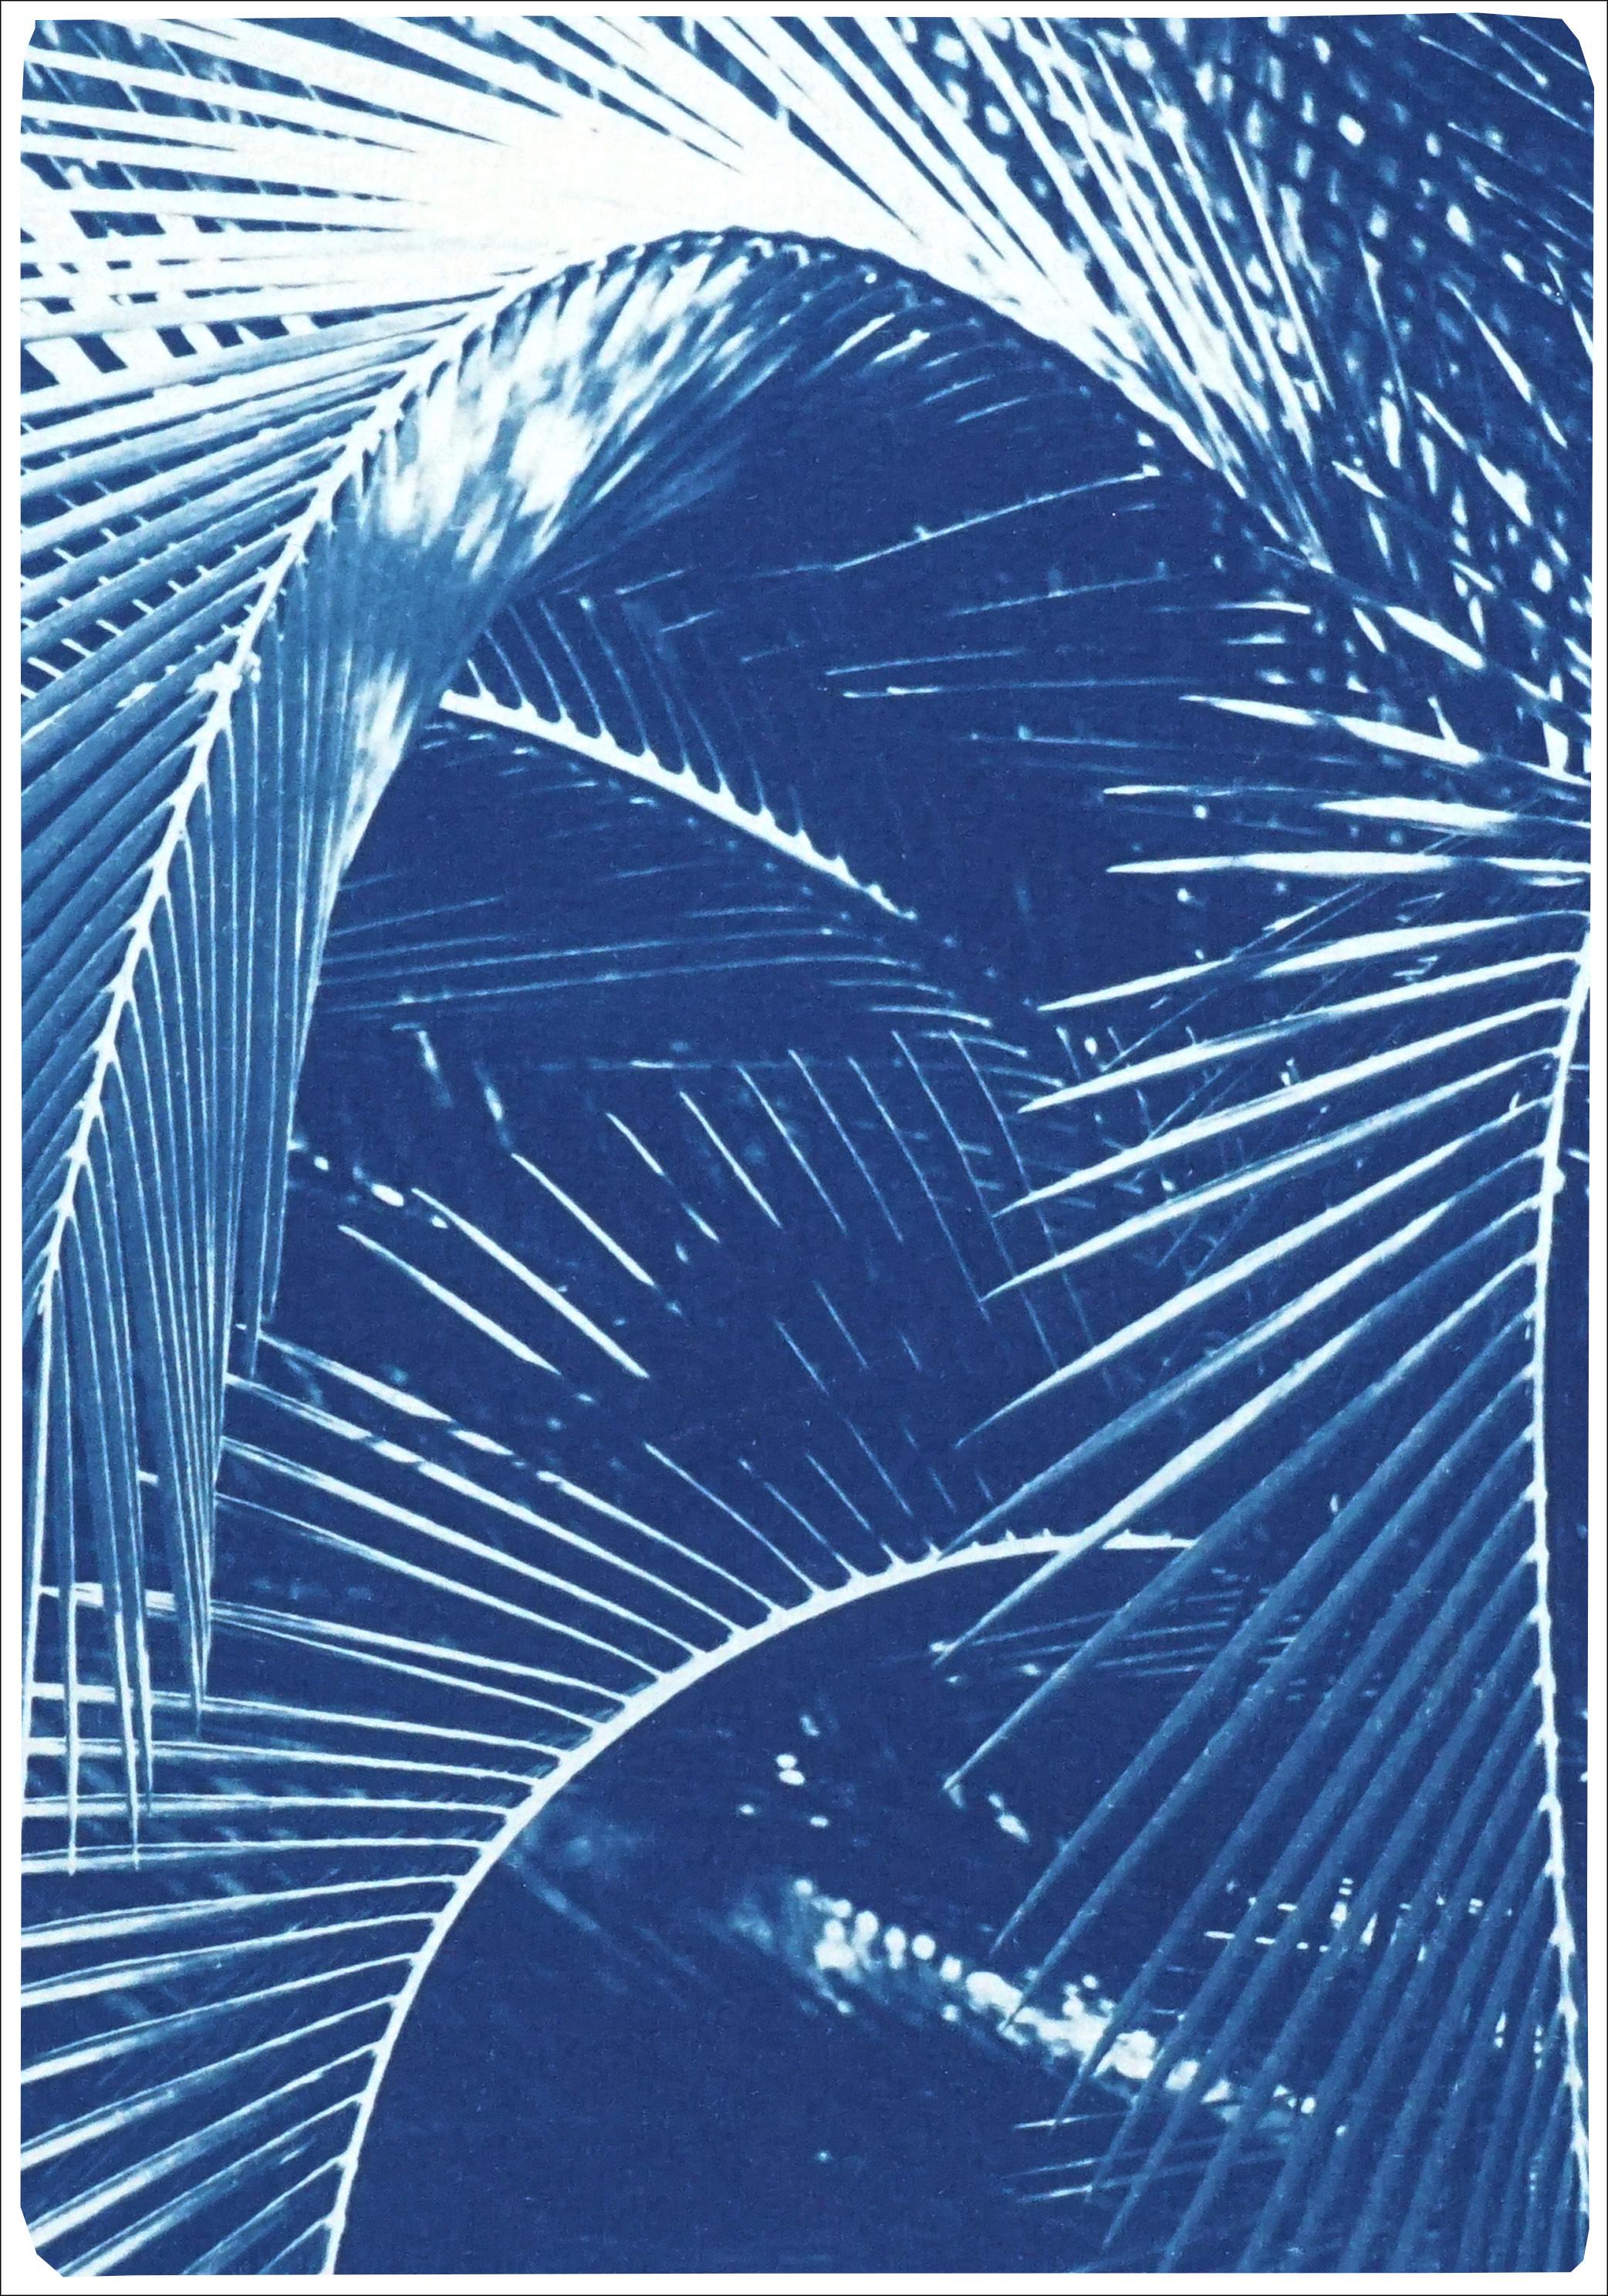 This is an exclusive handprinted limited edition cyanotype of a beautiful palm trees tropical garden. 

Details:
+ Title: Shady Majesty Palm Leaves
+ Year: 2021
+ Edition Size: 100
+ Stamped and Certificate of Authenticity provided
+ Measurements :